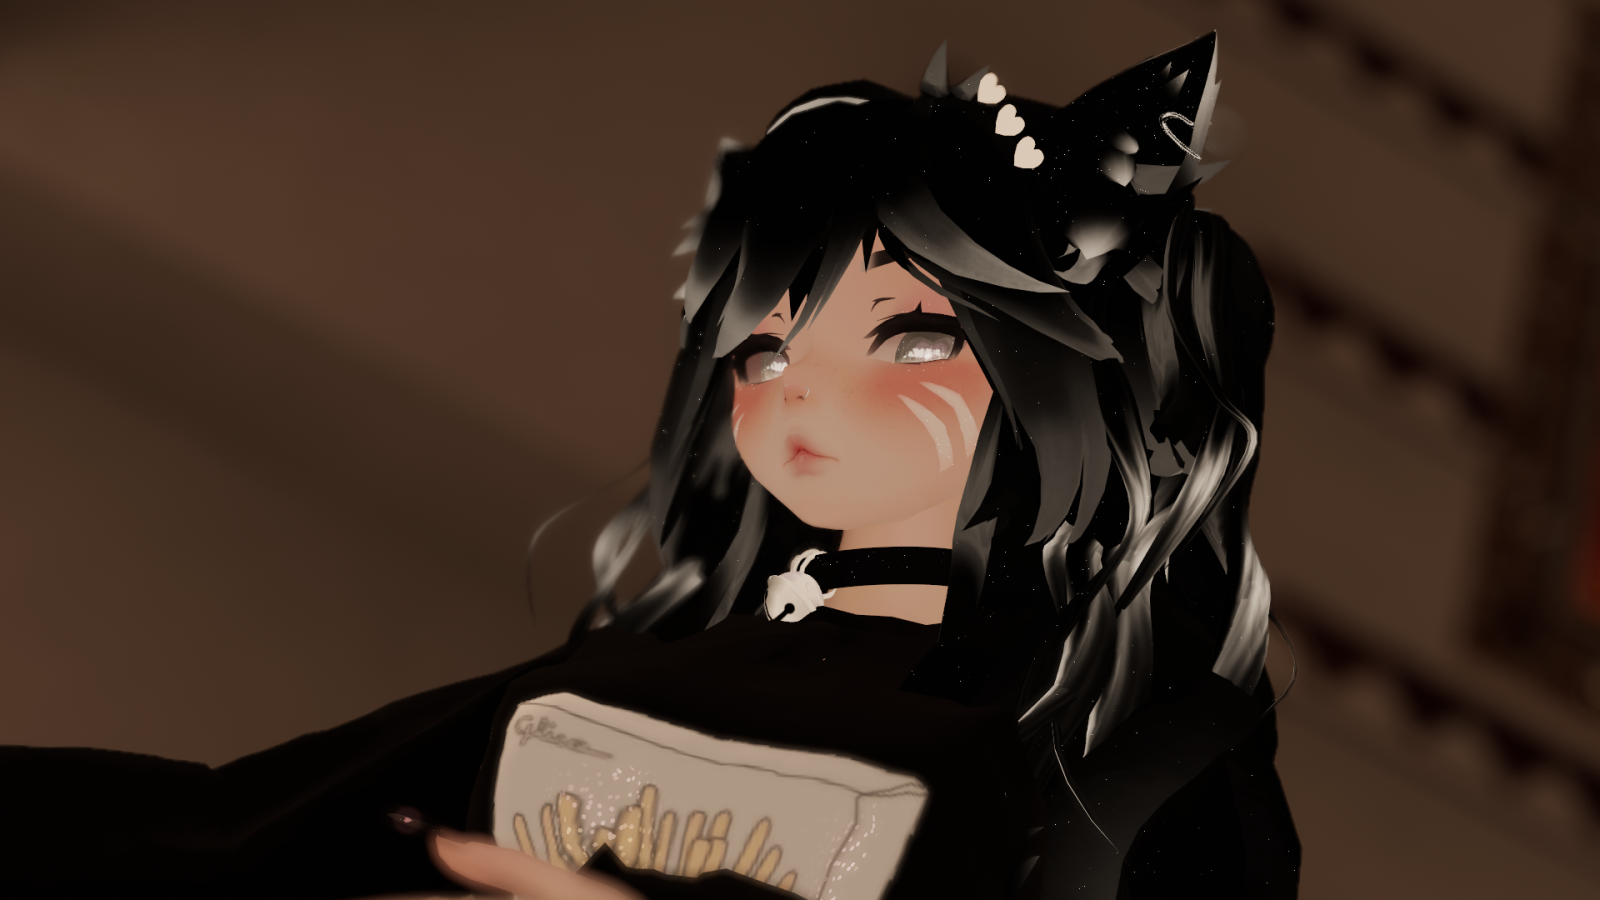 VRChat_1920x1080_2020-08-26_14-00-46.029.png